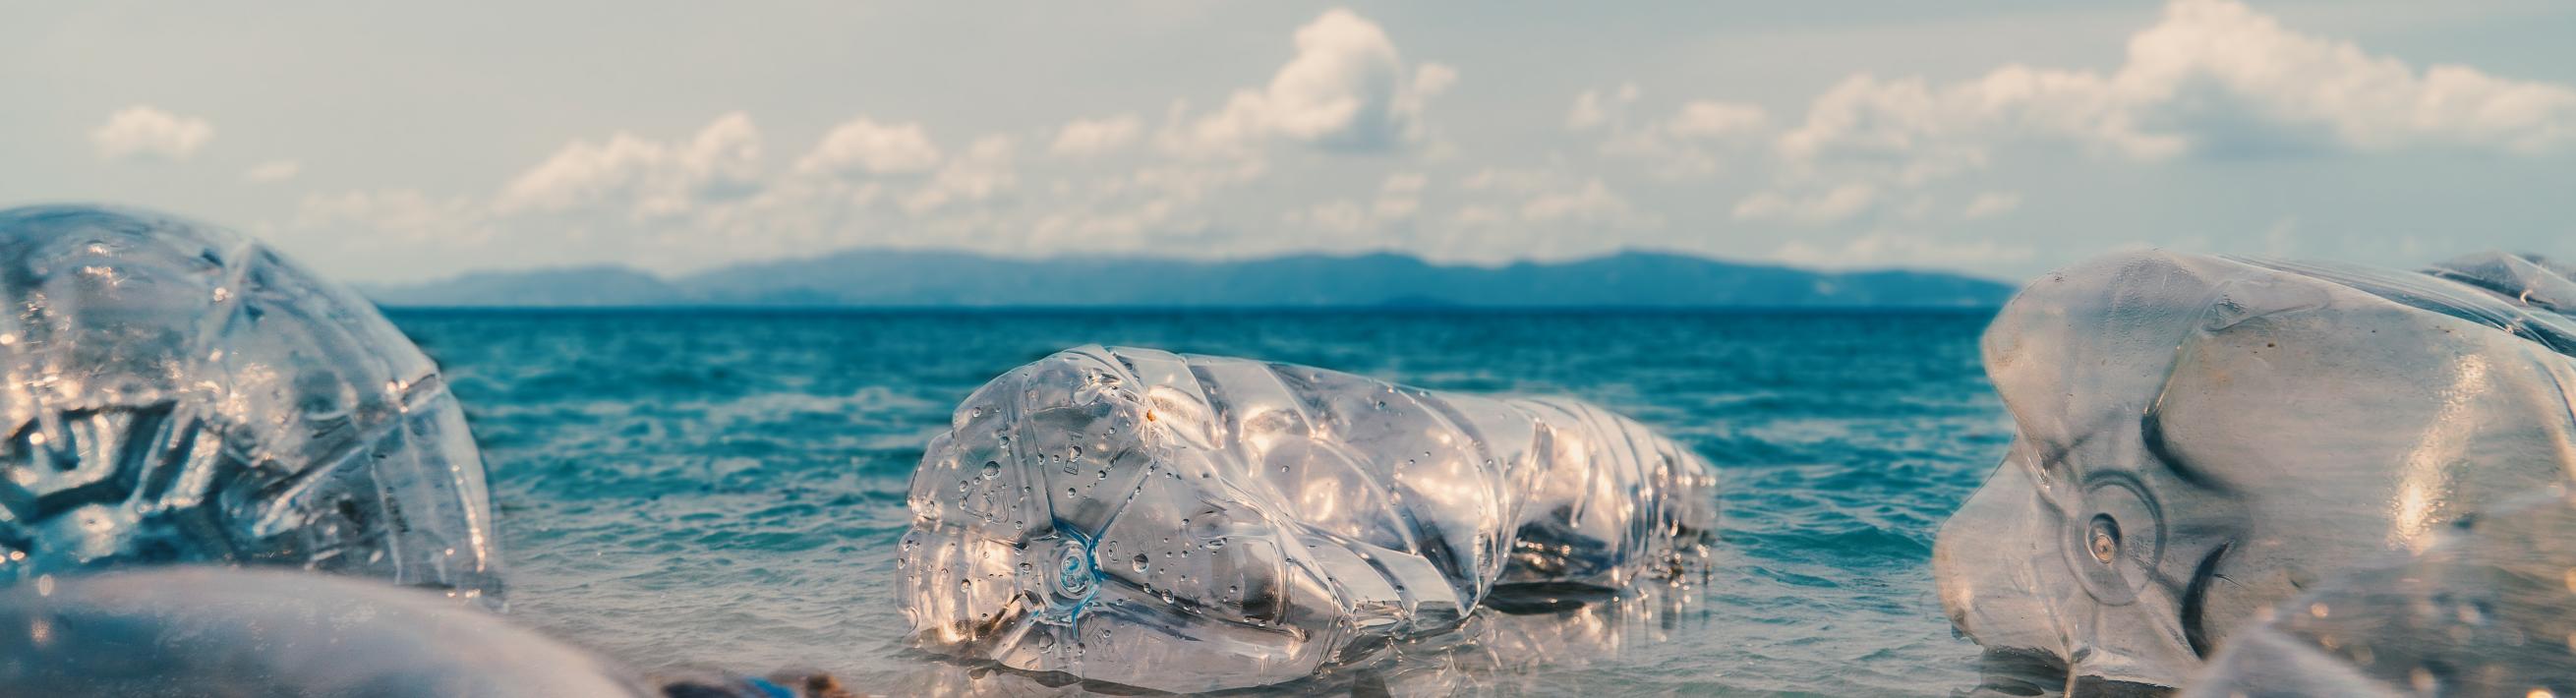 Plastic bottles in the water